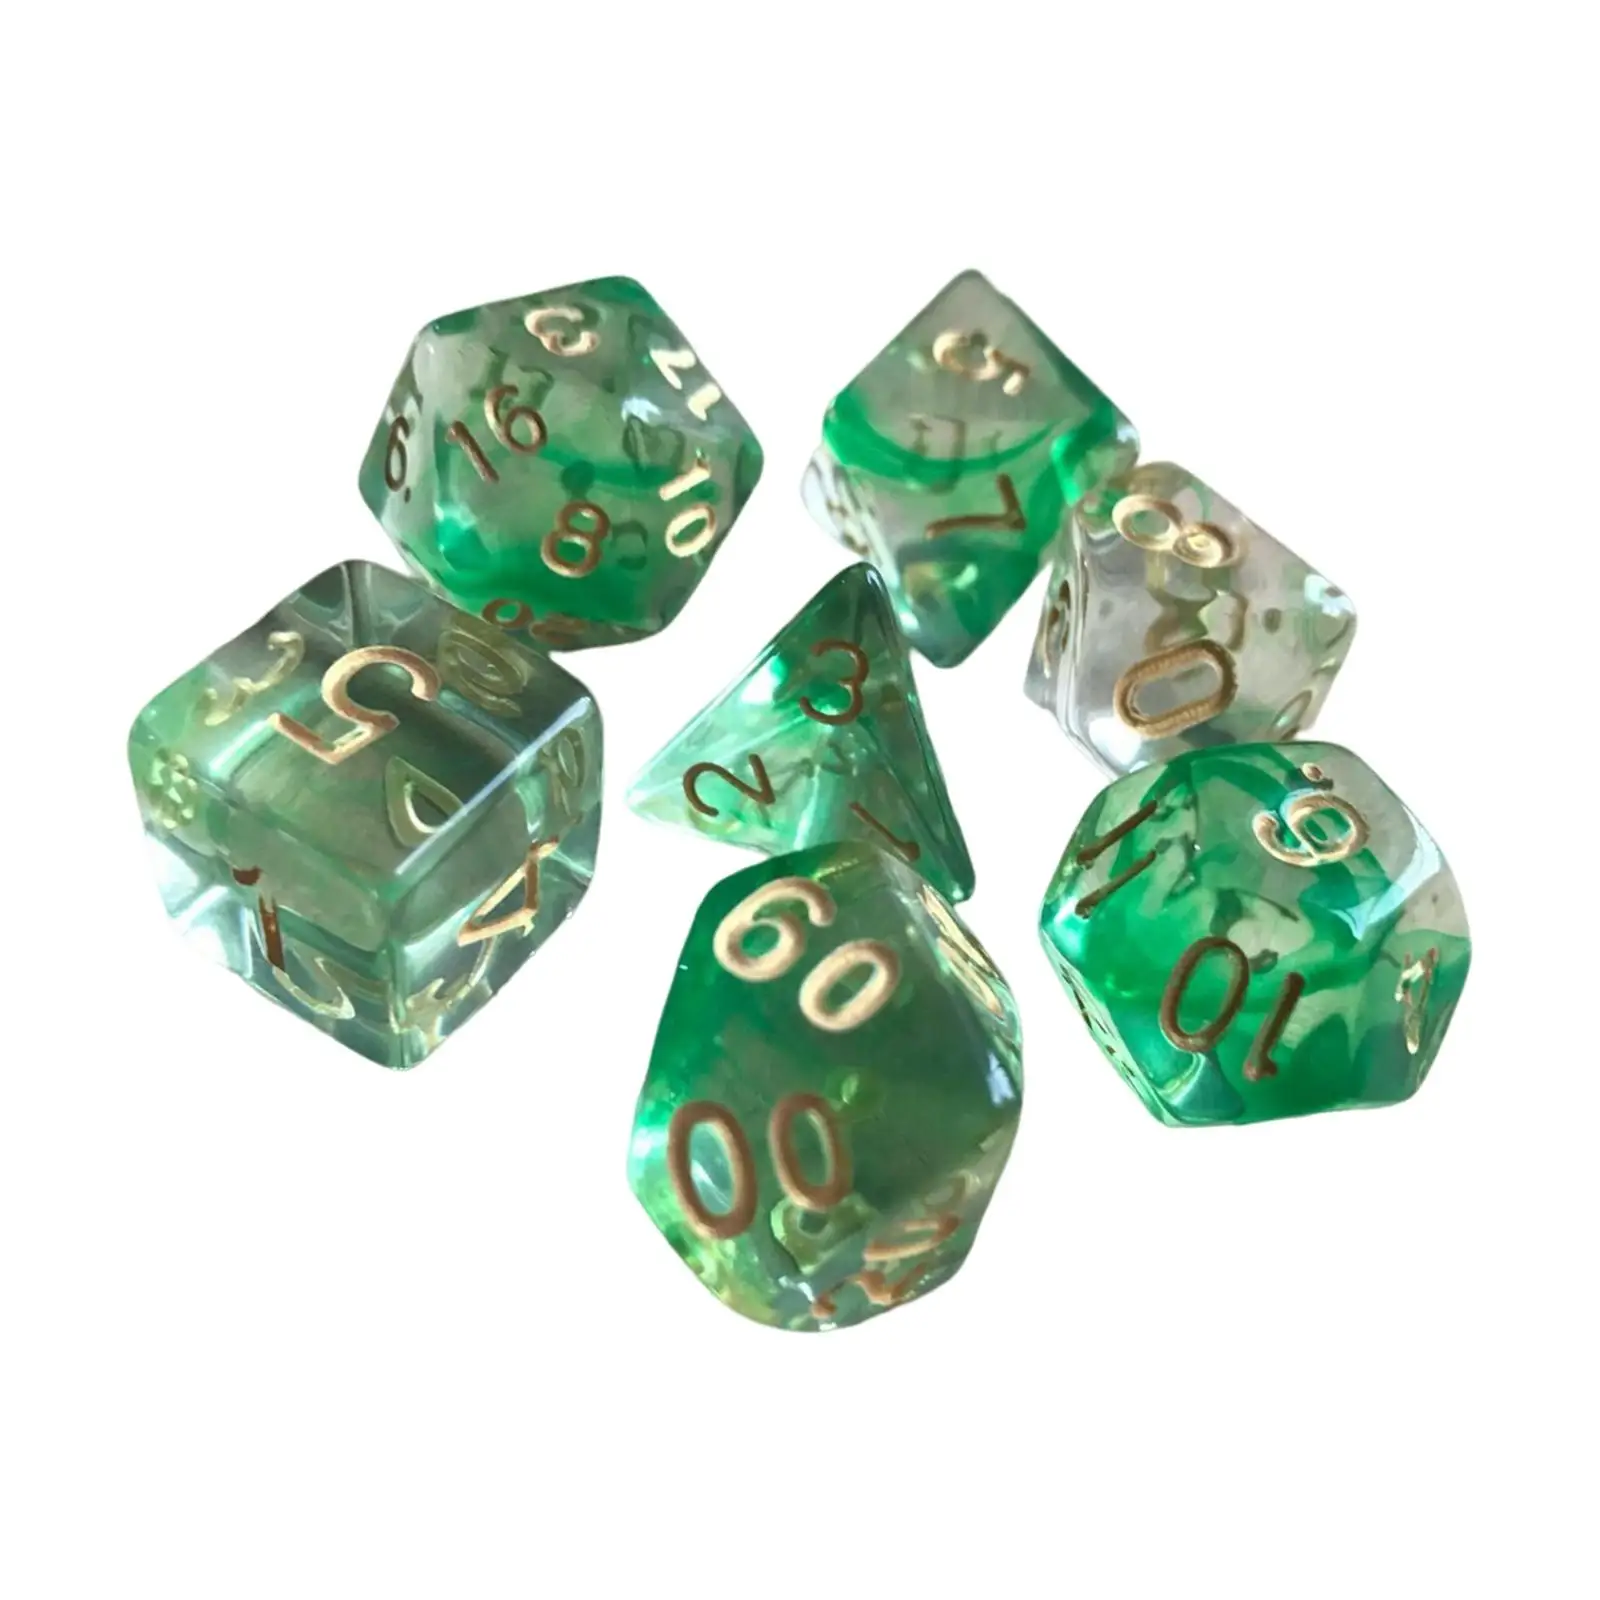 7Pcs Polyhedral Dice Play Entertainment Toys D4-D20 for Bar Family Gathering